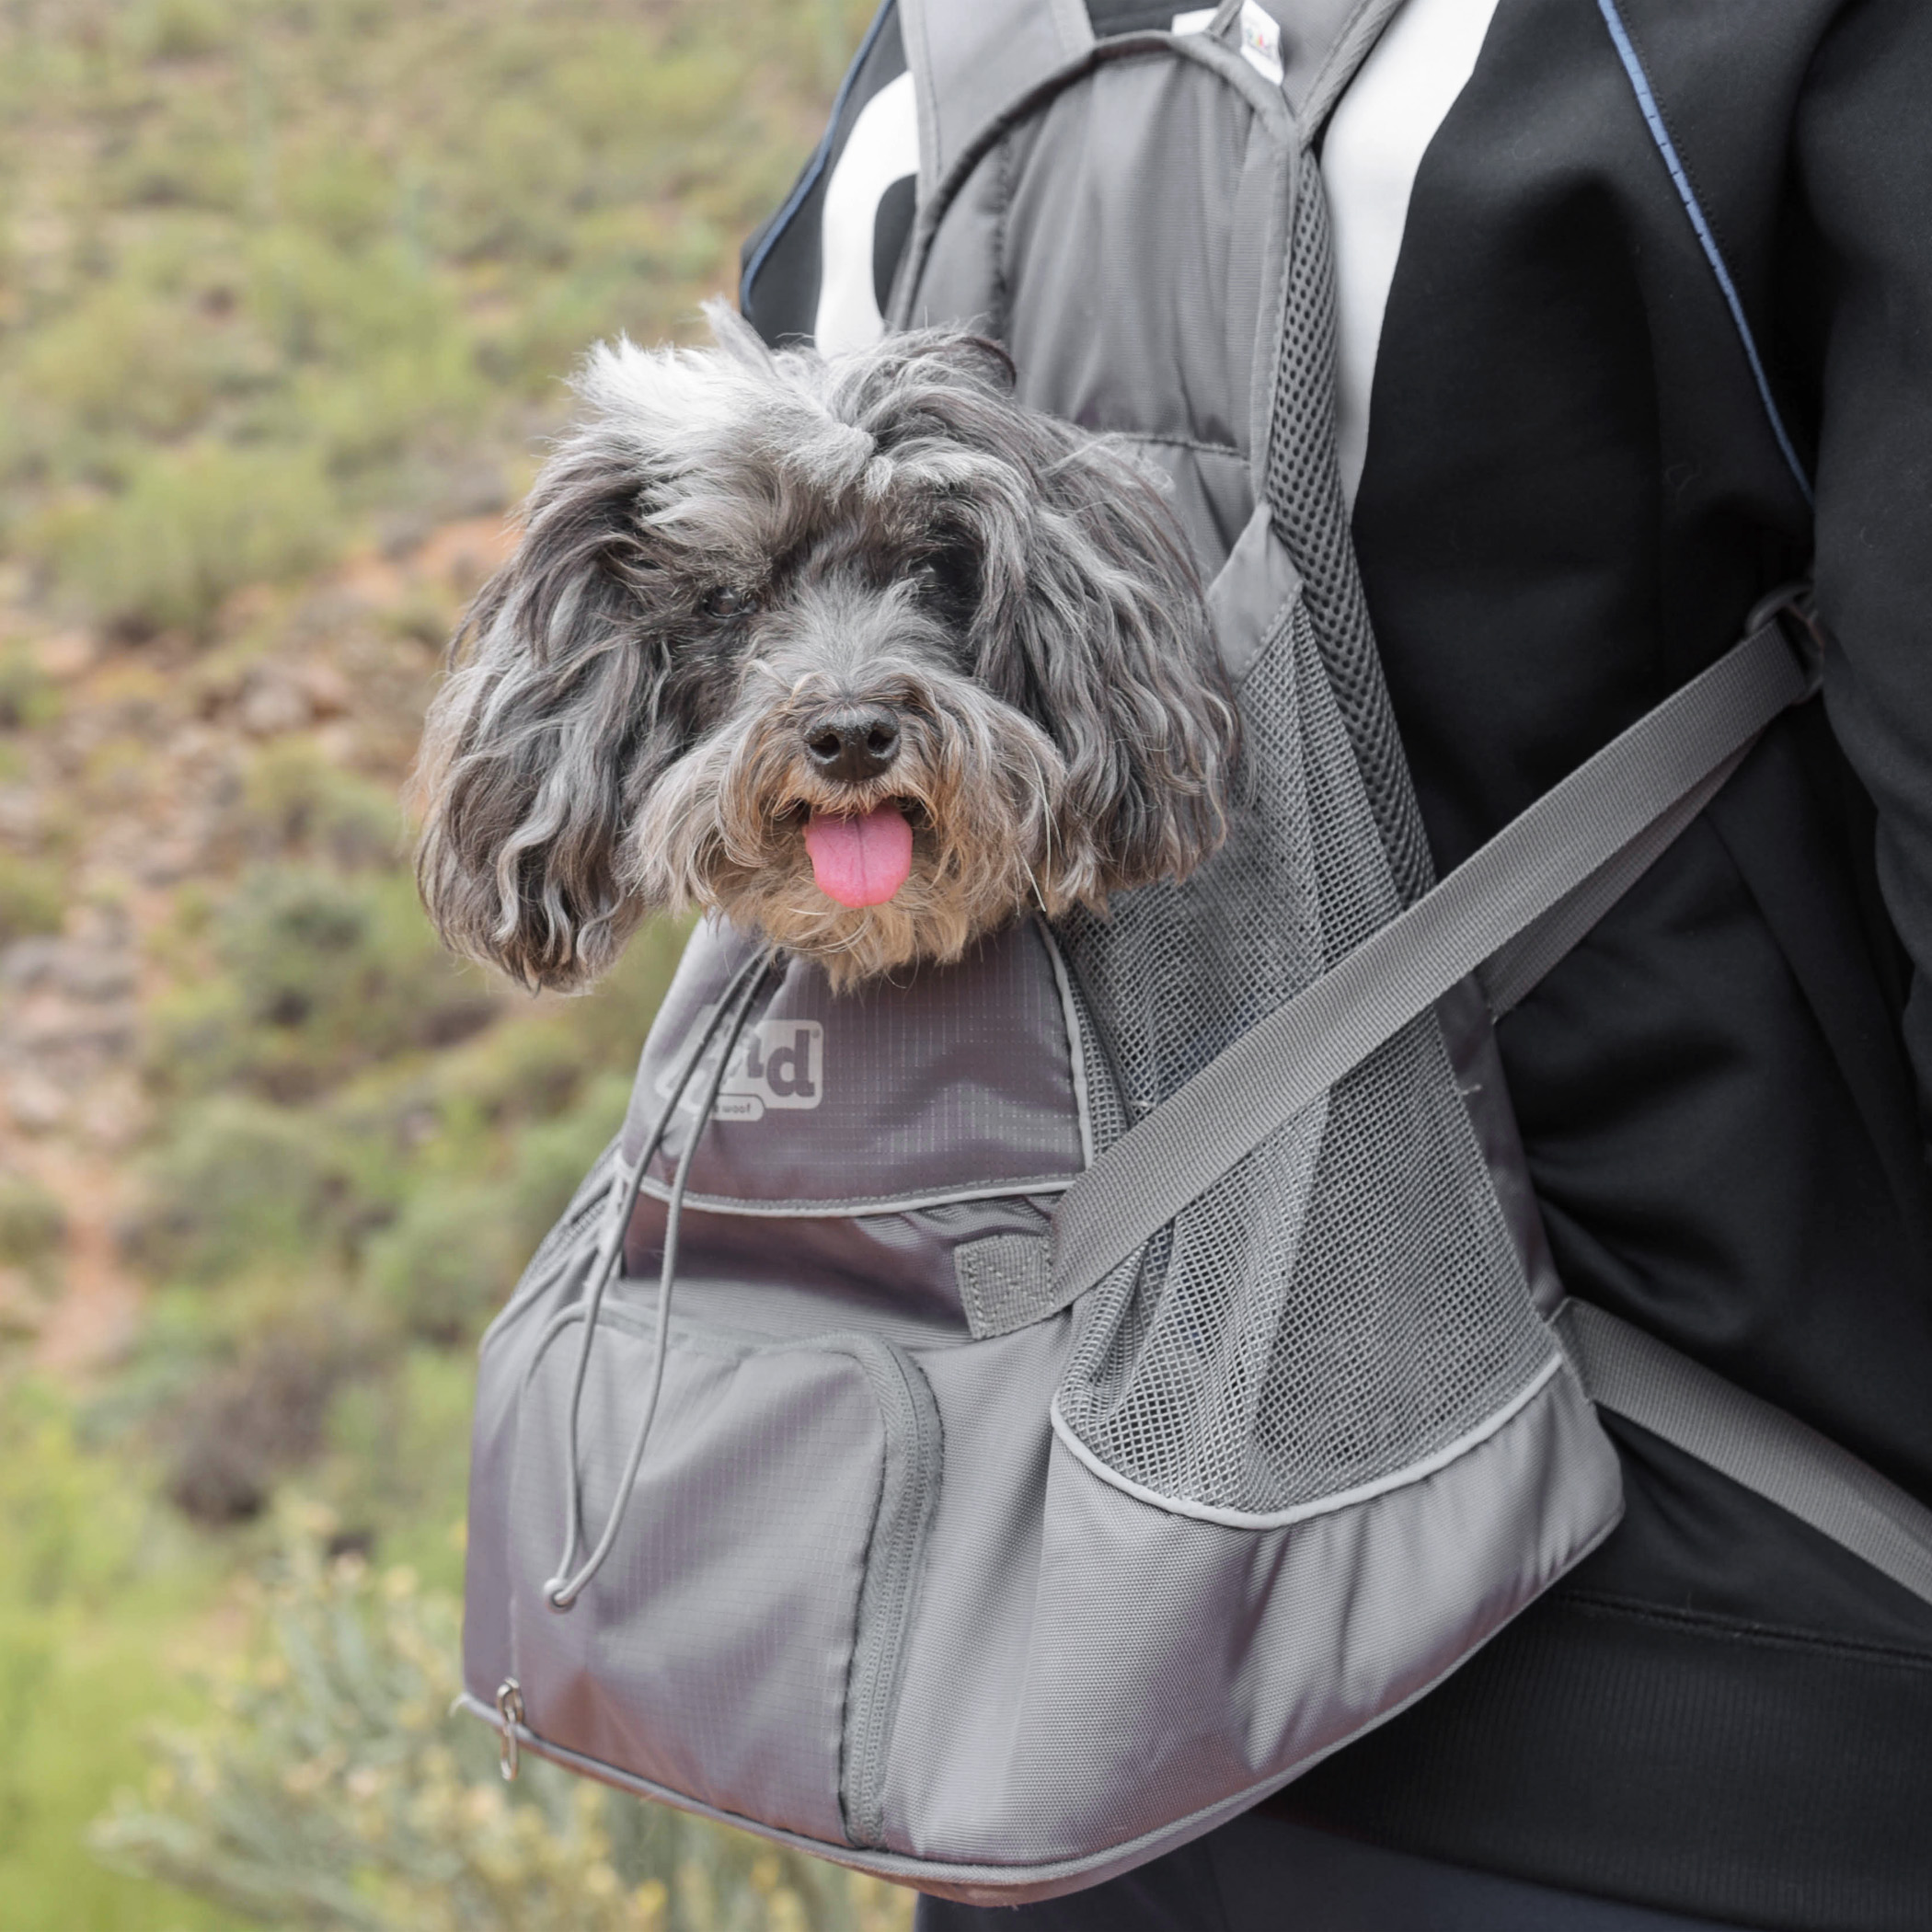  If you’ve ever wondered how Joey &amp; Benji go hiking, this is how. Joey rides with his Daddy (so he can keep an eye on Mom!), and Benji rides with Mom. The backpacks are from  Outward Hound &nbsp;and are made just for pups. They’re easy to load in